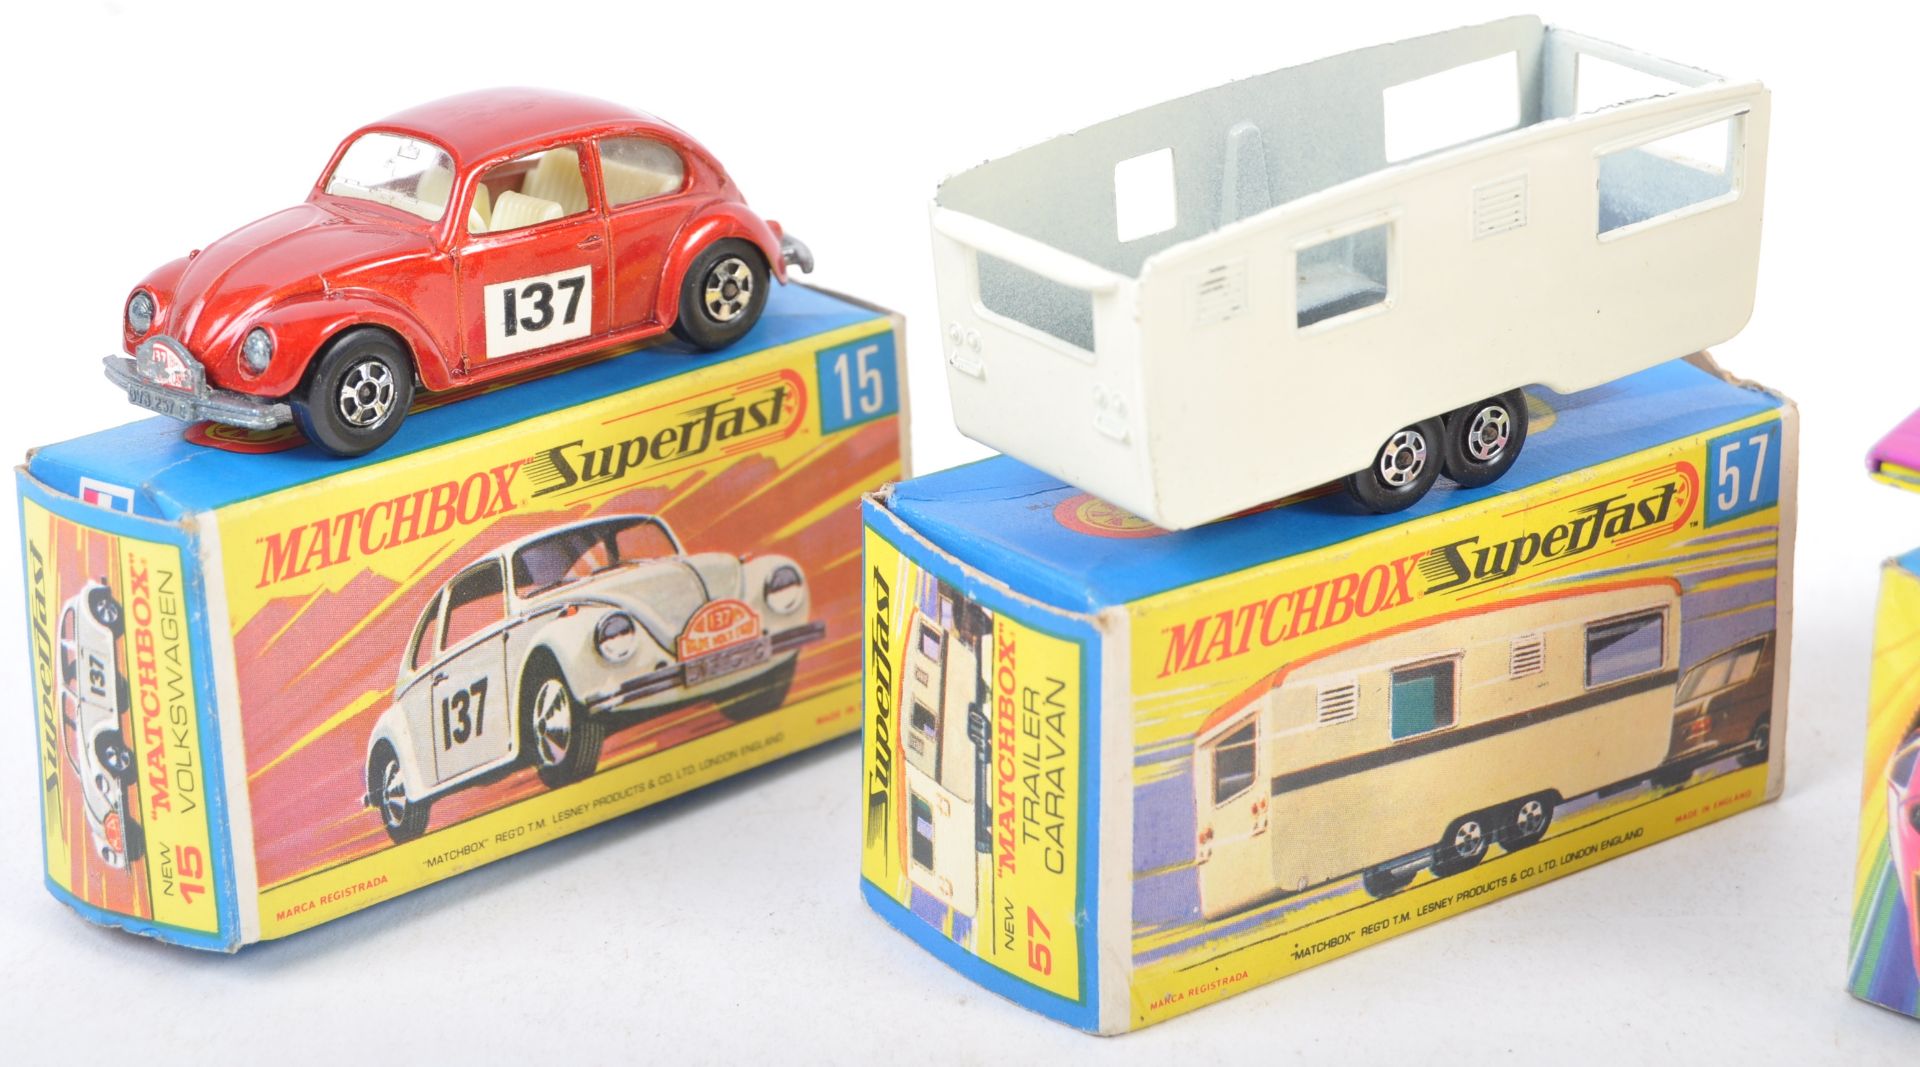 COLLECTION OF VINTAGE MATCHBOX SUPERFAST BOXED DIECAST MODELS - Image 4 of 4